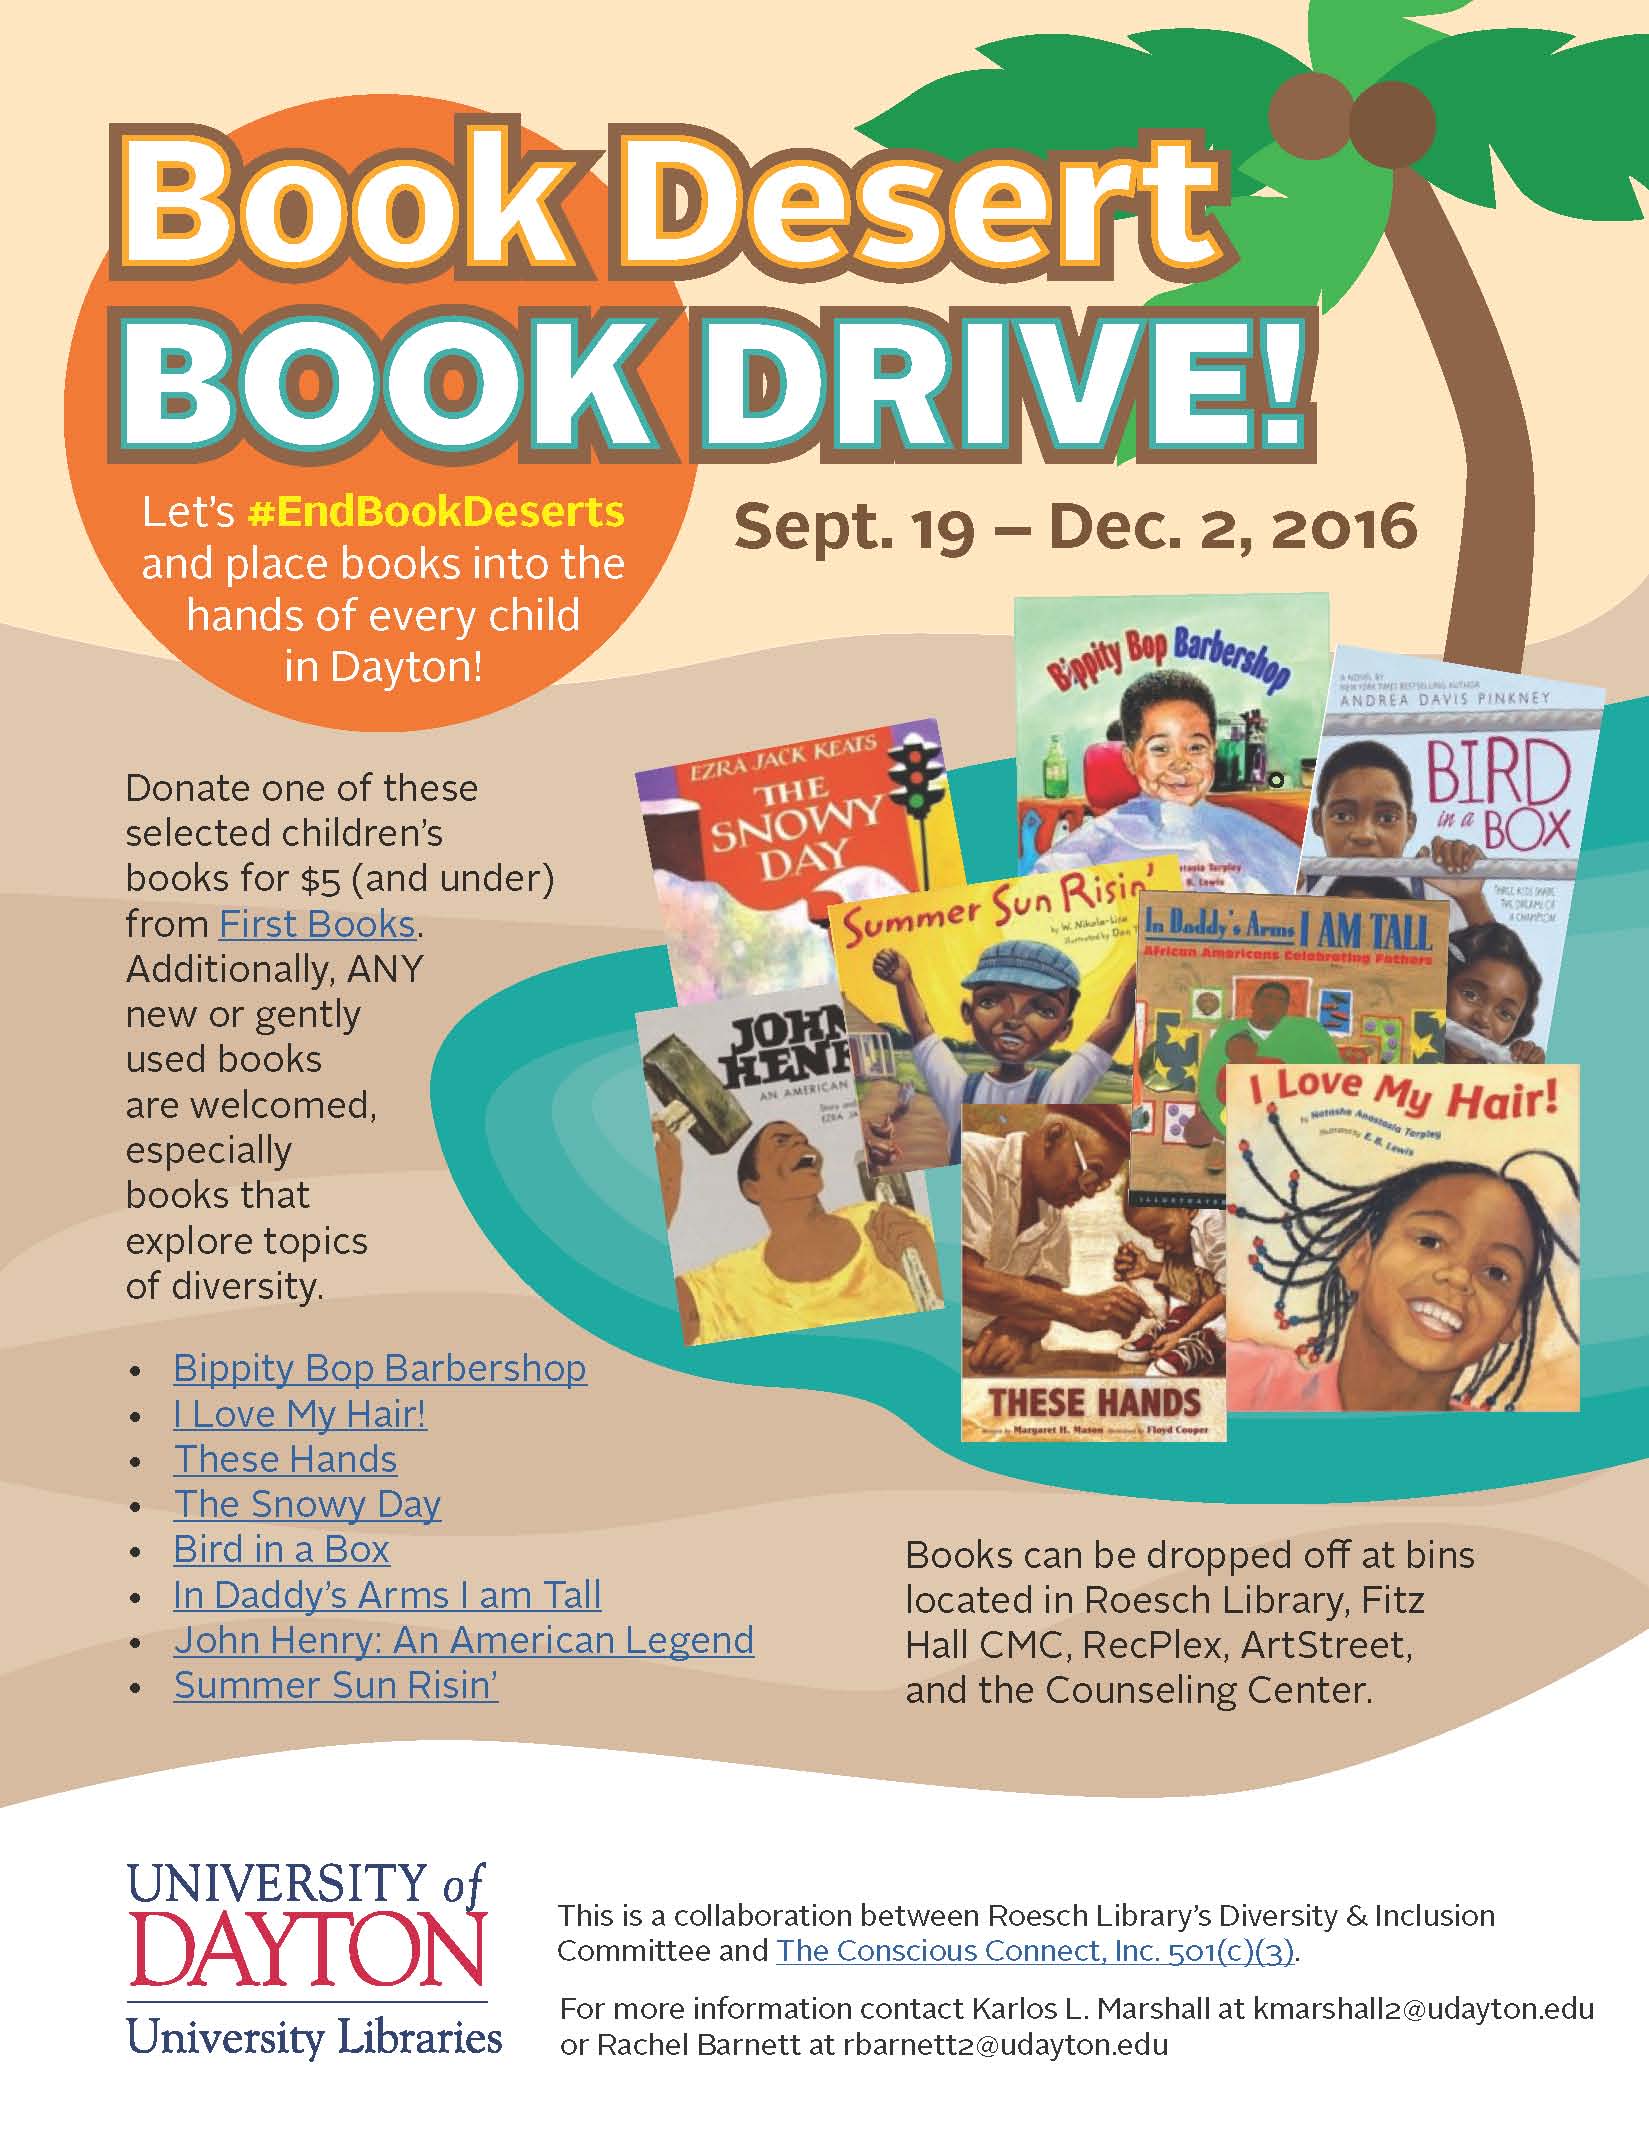 The 2016 Book Drive flyer to end Book Deserts in Dayton.